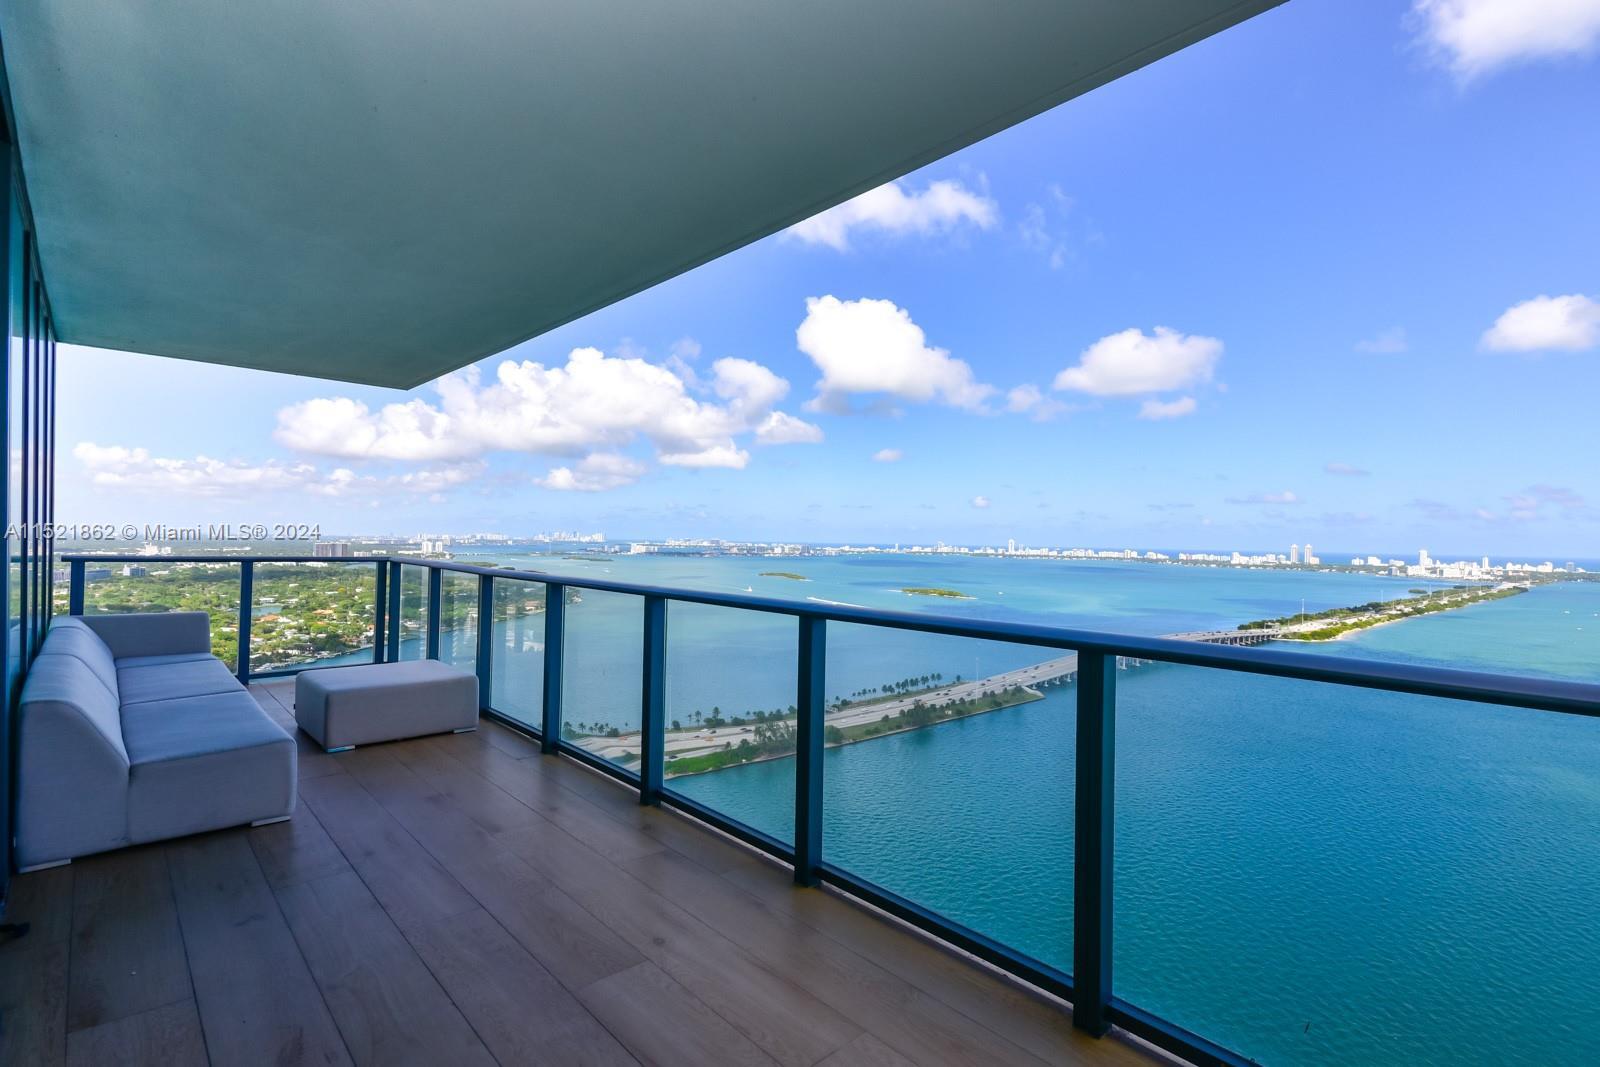 Spectacular corner unit at One Paraiso with unobstructed views of Biscayne Bay. This 3 bedroom, 3.5 